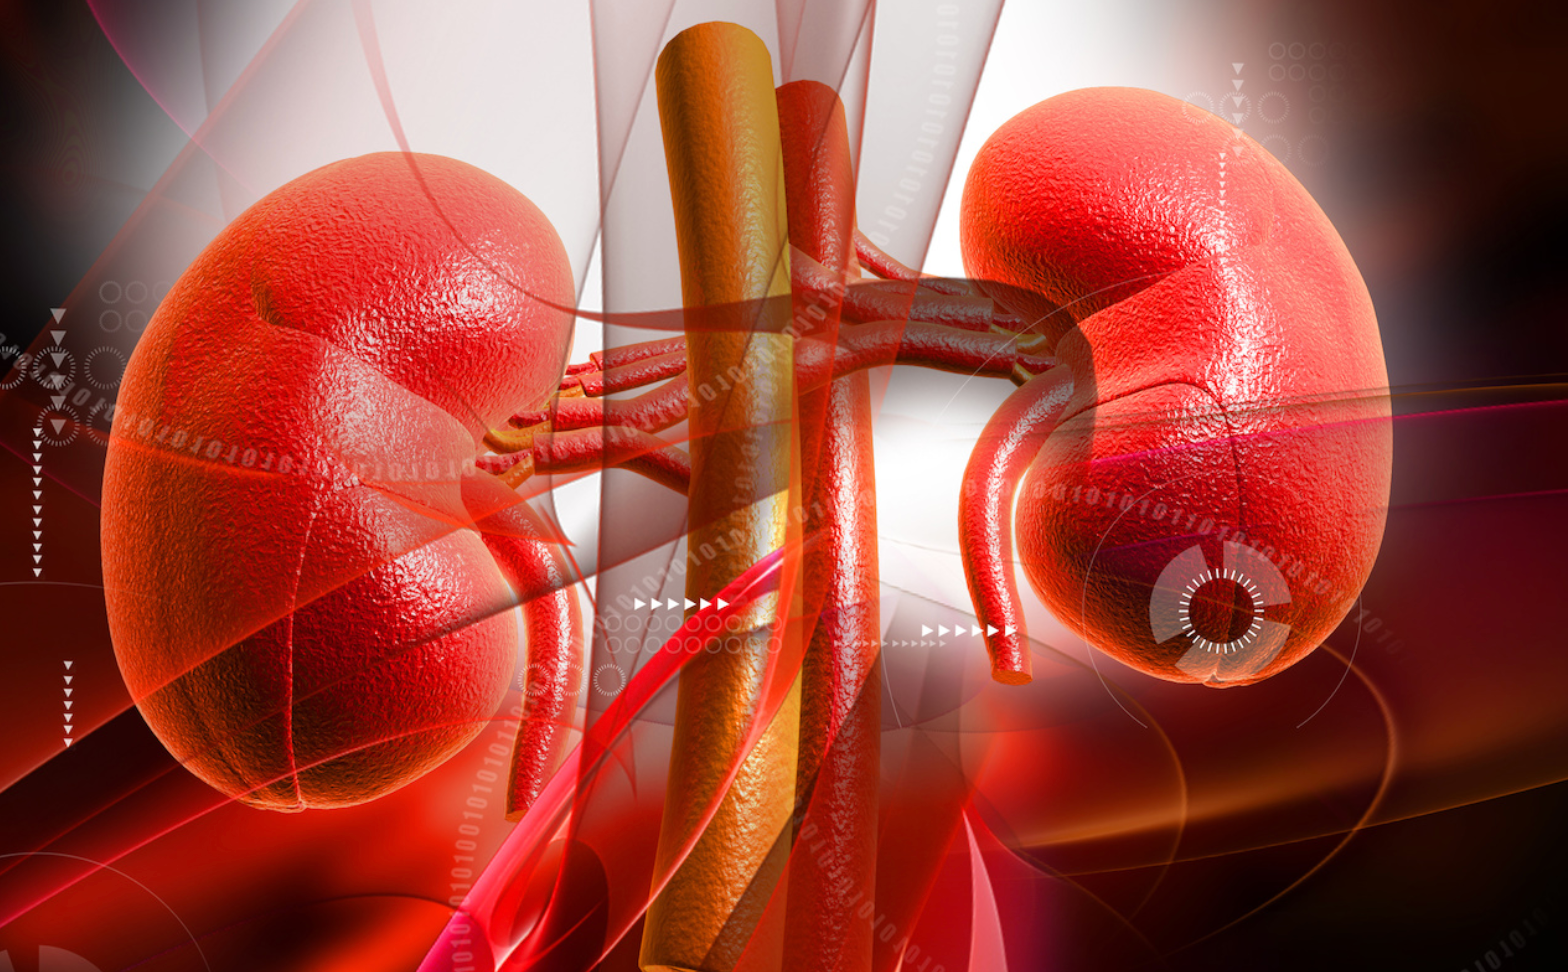 FDA Grants Accelerated Approval to Sparsentan for Progressive Form of Kidney Disease